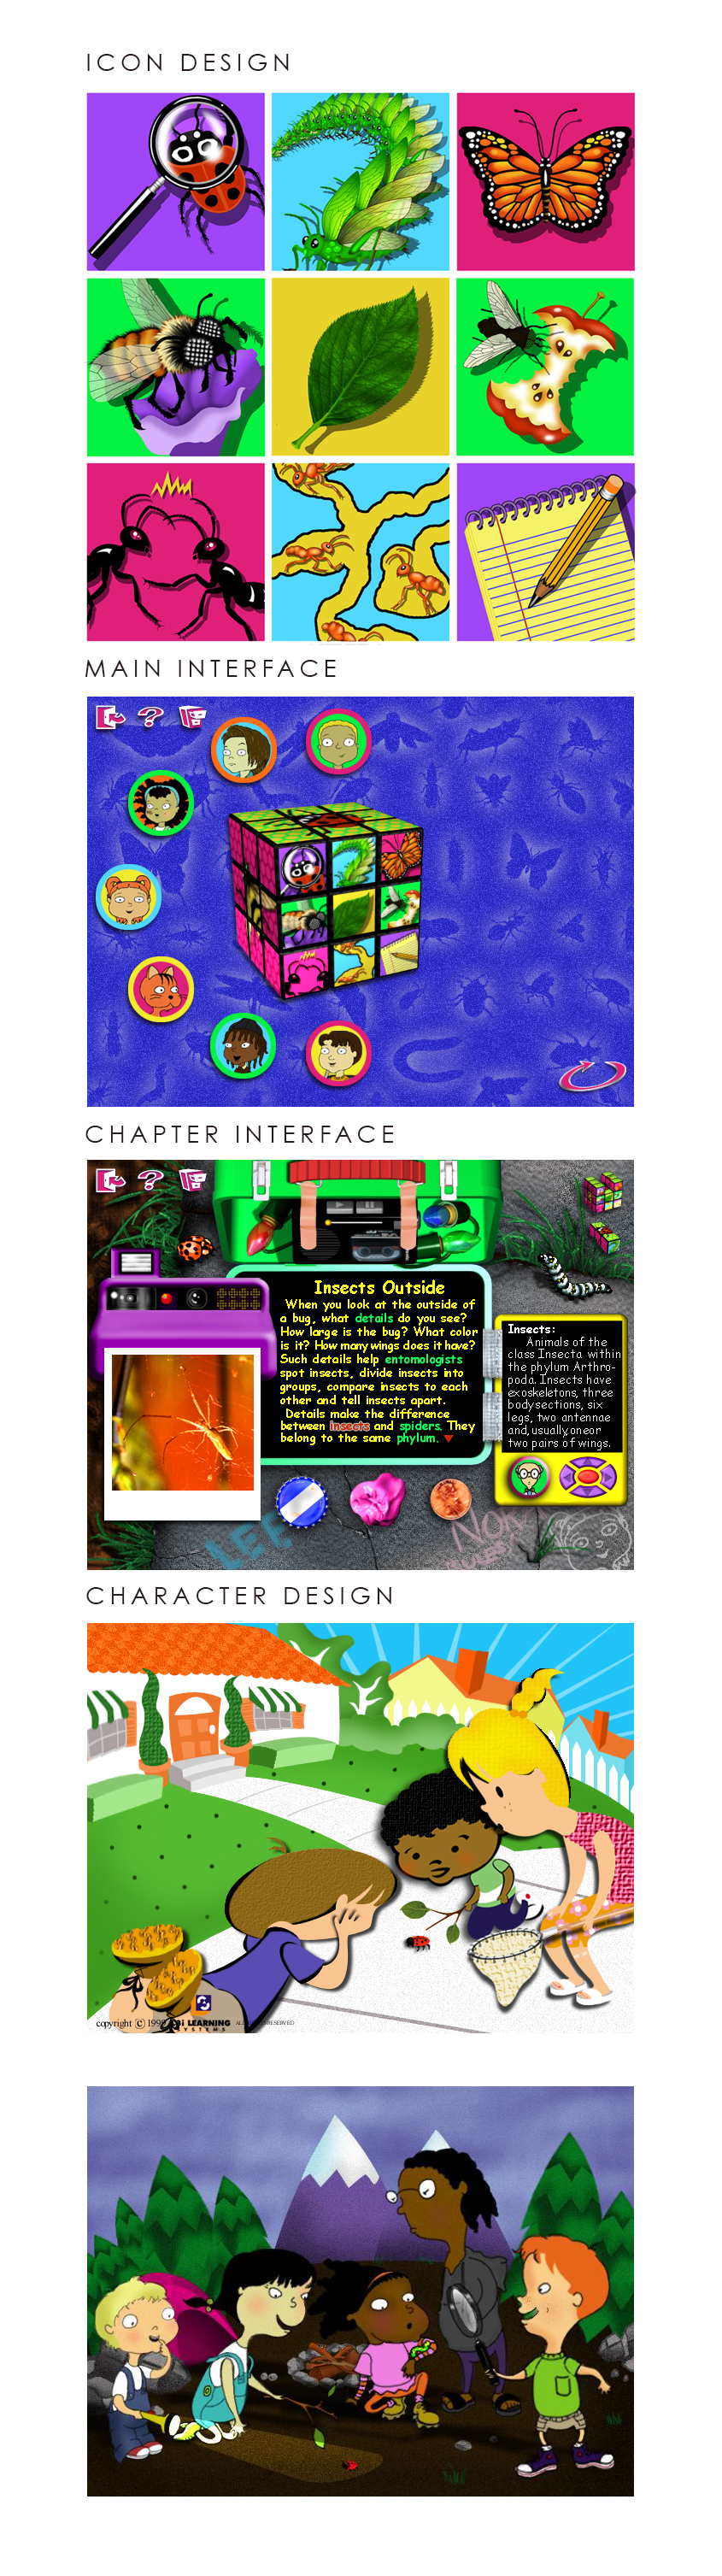 Education Interactive Game Design Interface icons illustrations